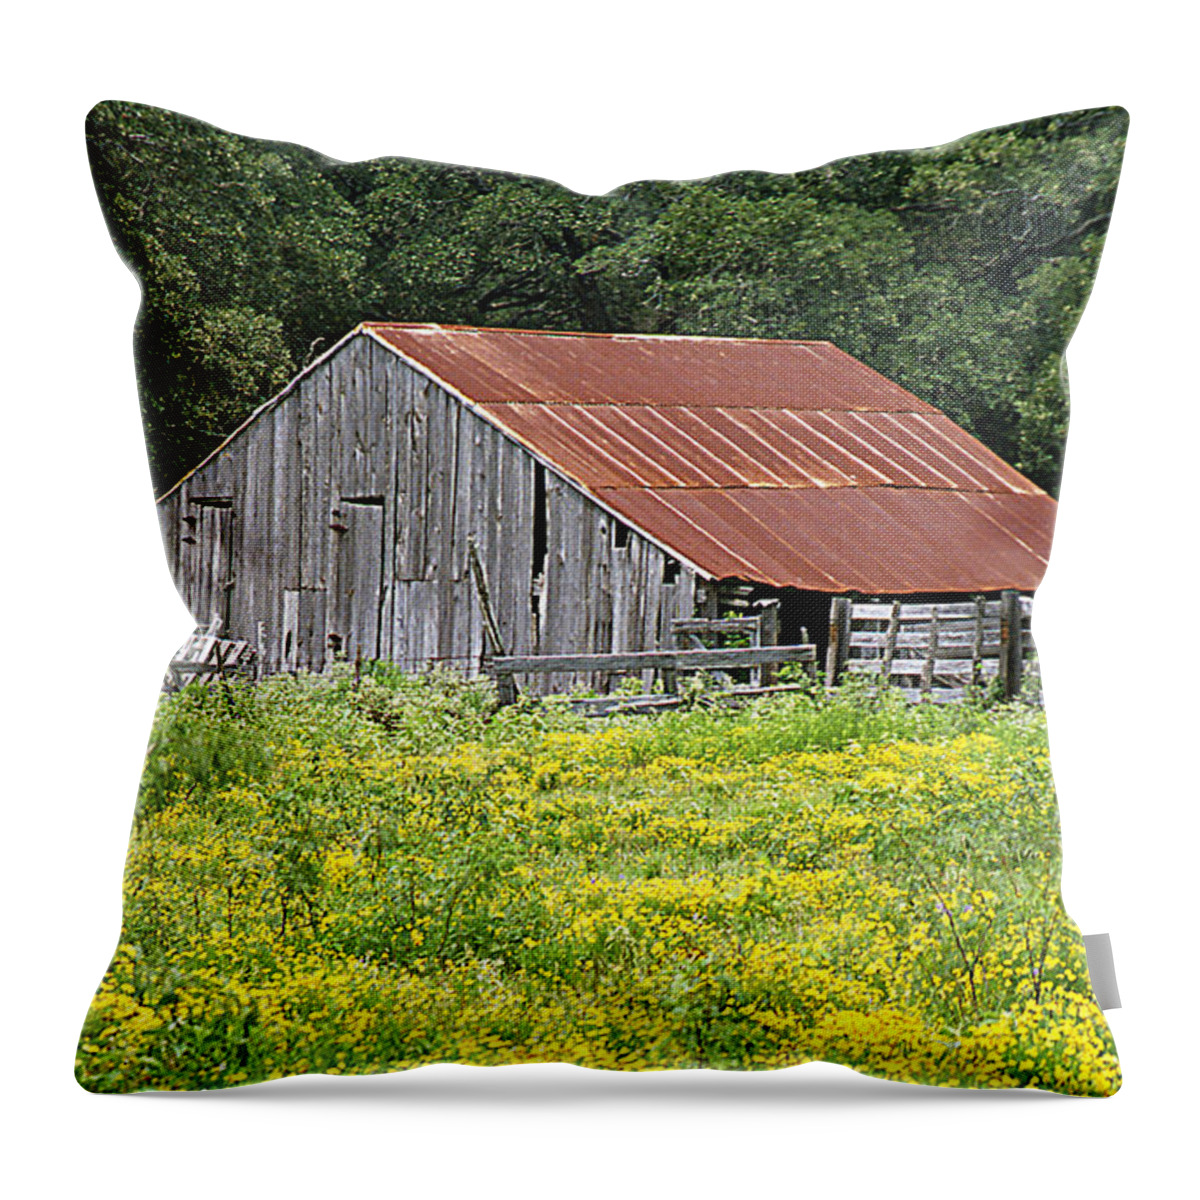 Structures Throw Pillow featuring the photograph Old Barn by Jim Smith